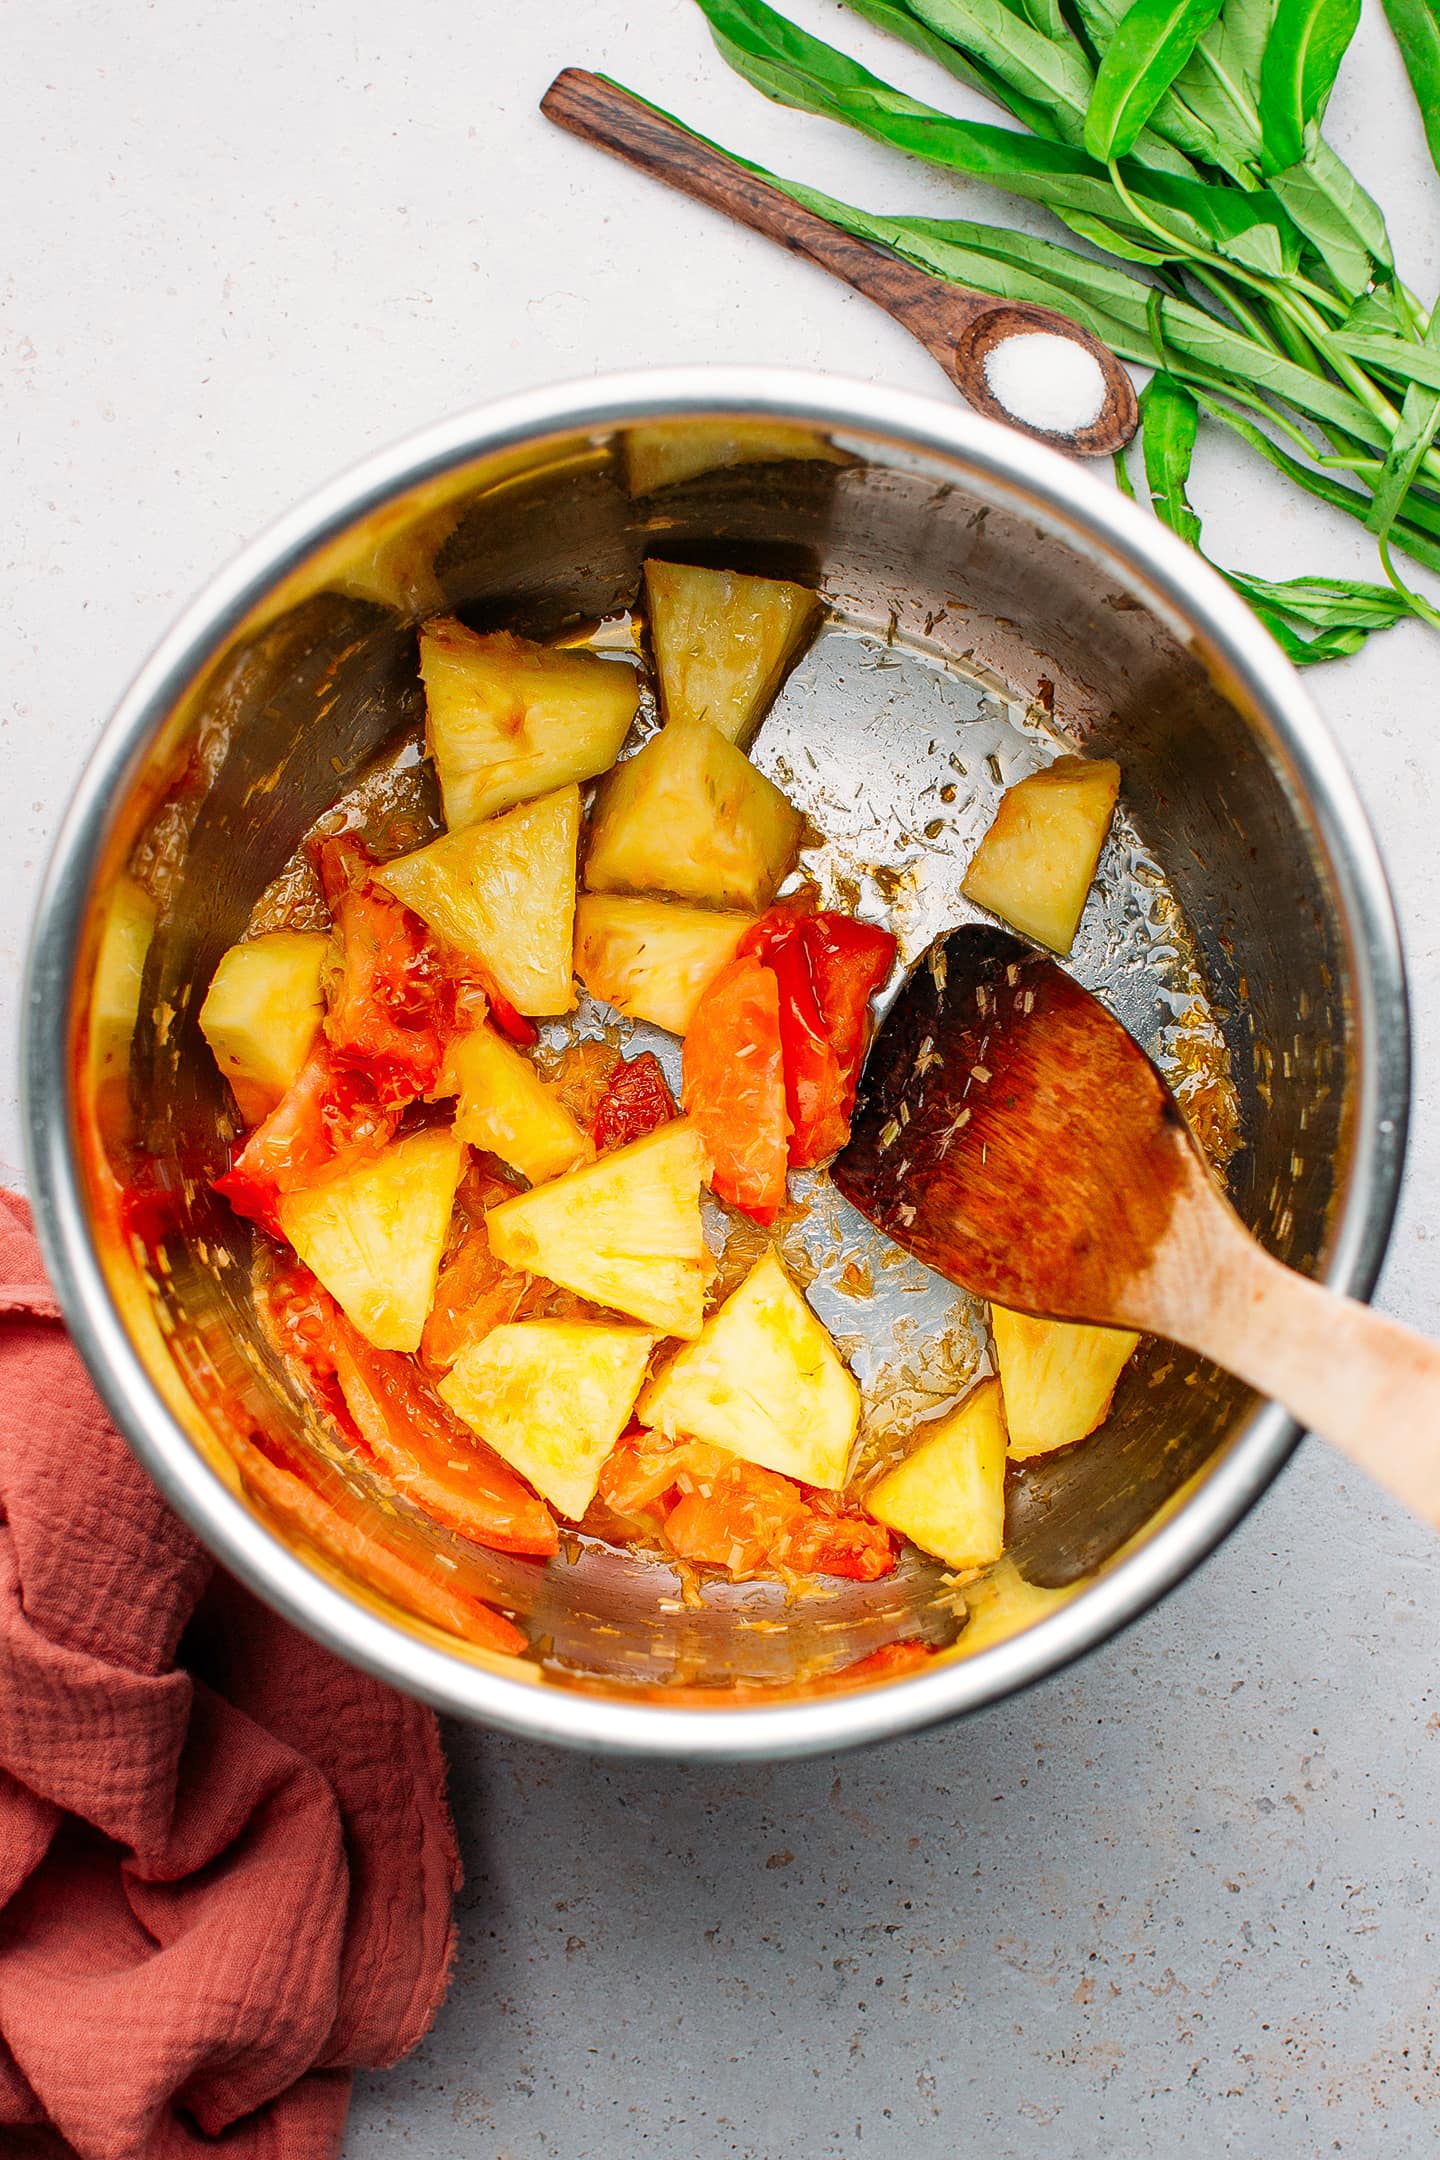 Stir-fried tomatoes and pineapple in a pot.